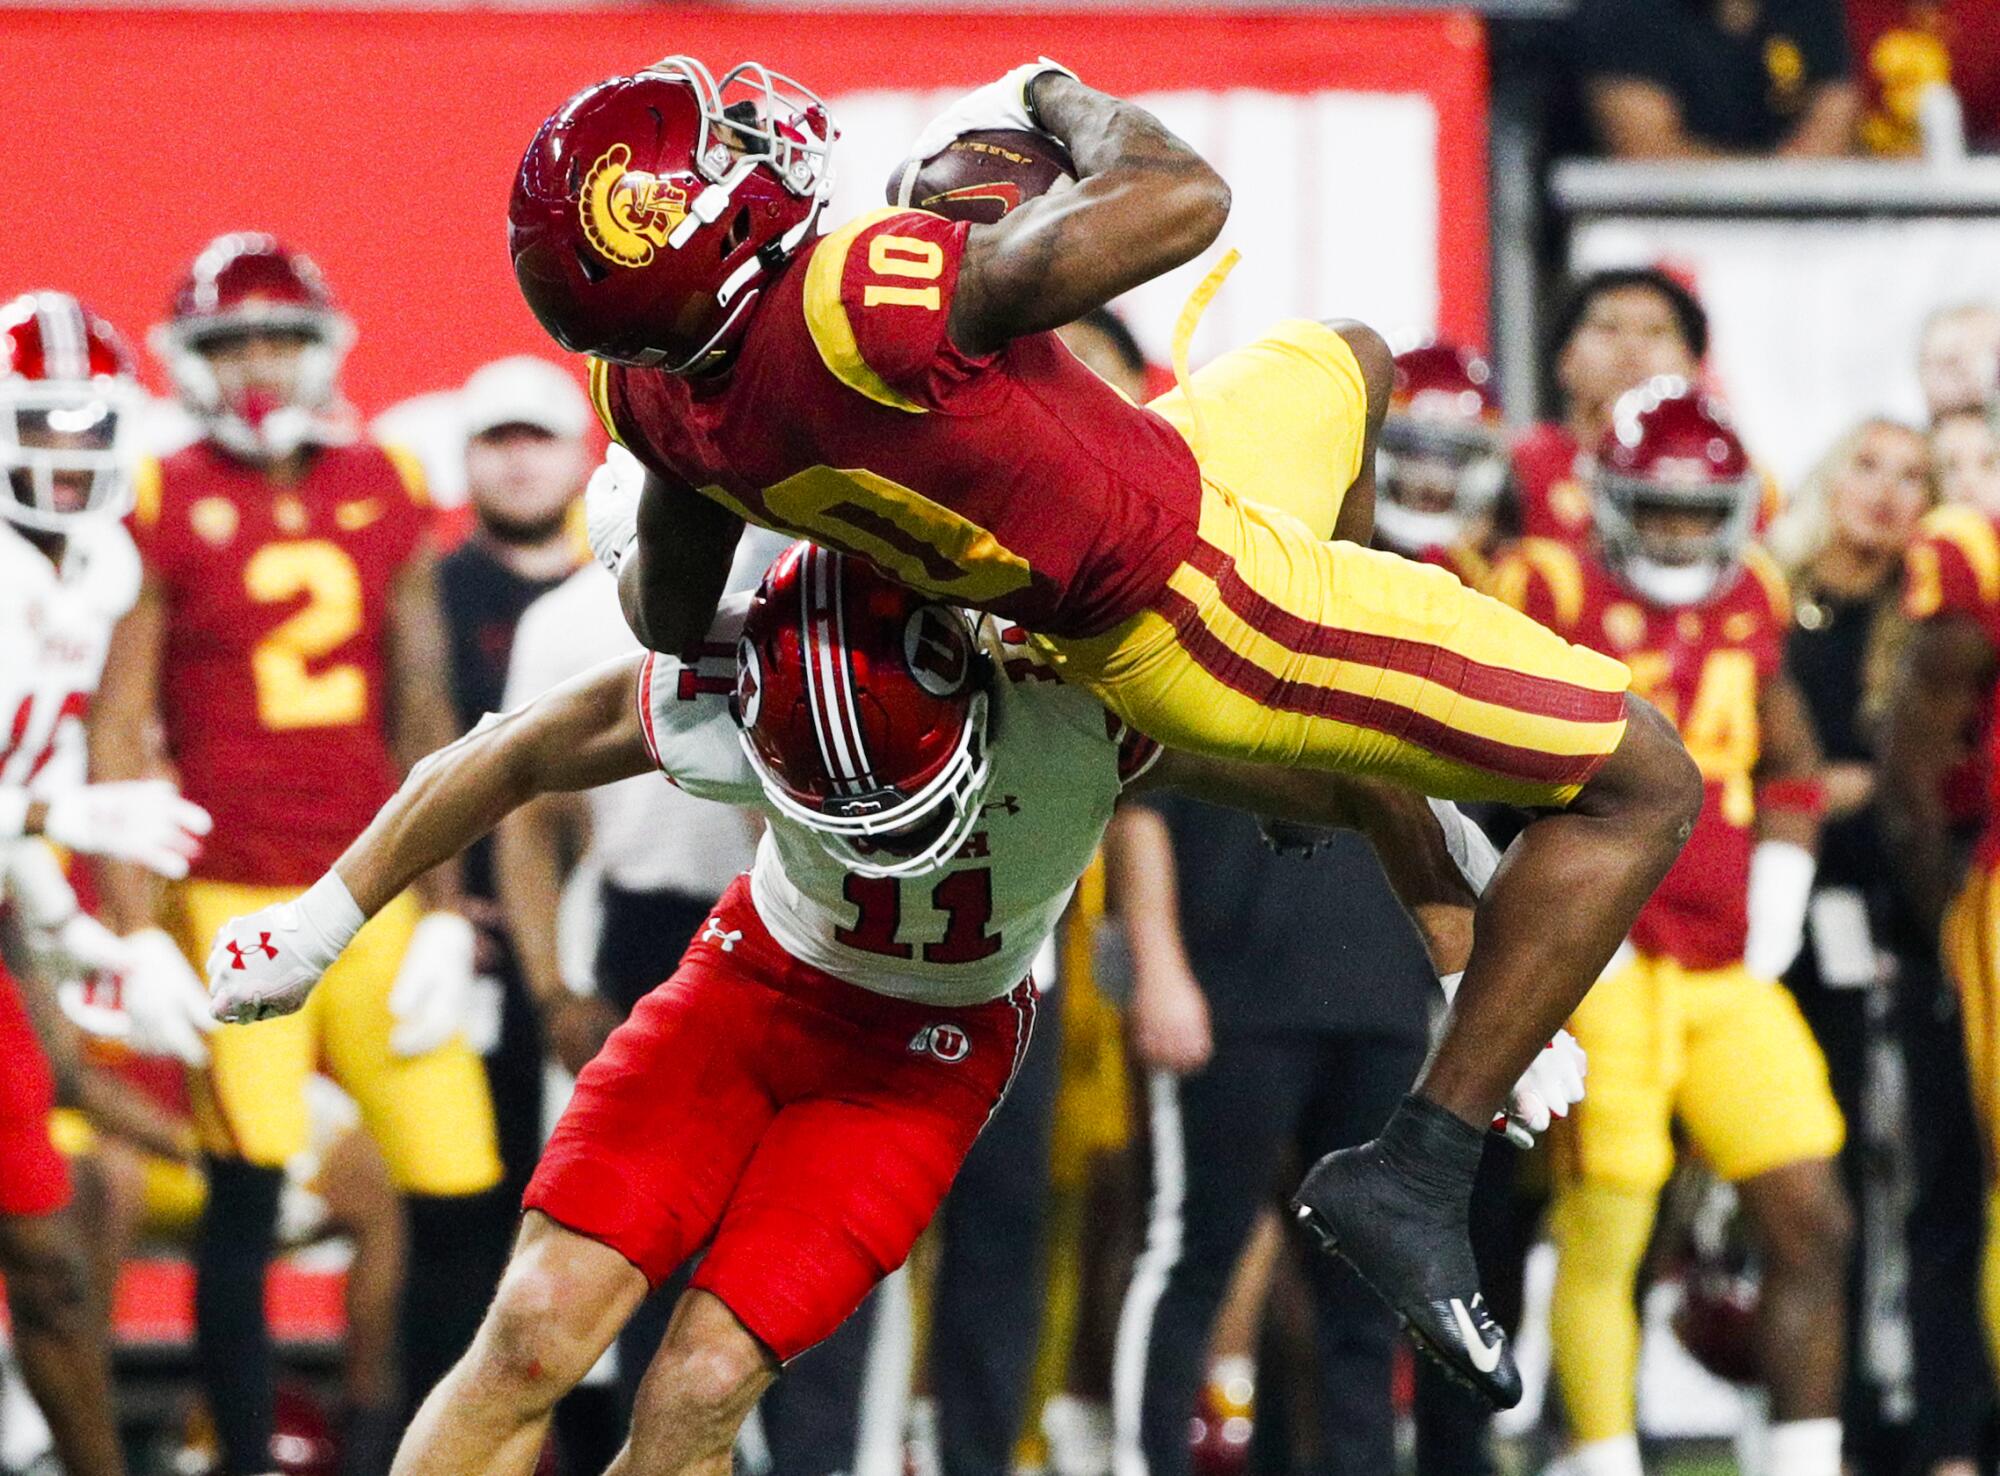 USC wide receiver Kyron Hudson (10) makes a leaping catch over Utah safety R.J. Hubert.